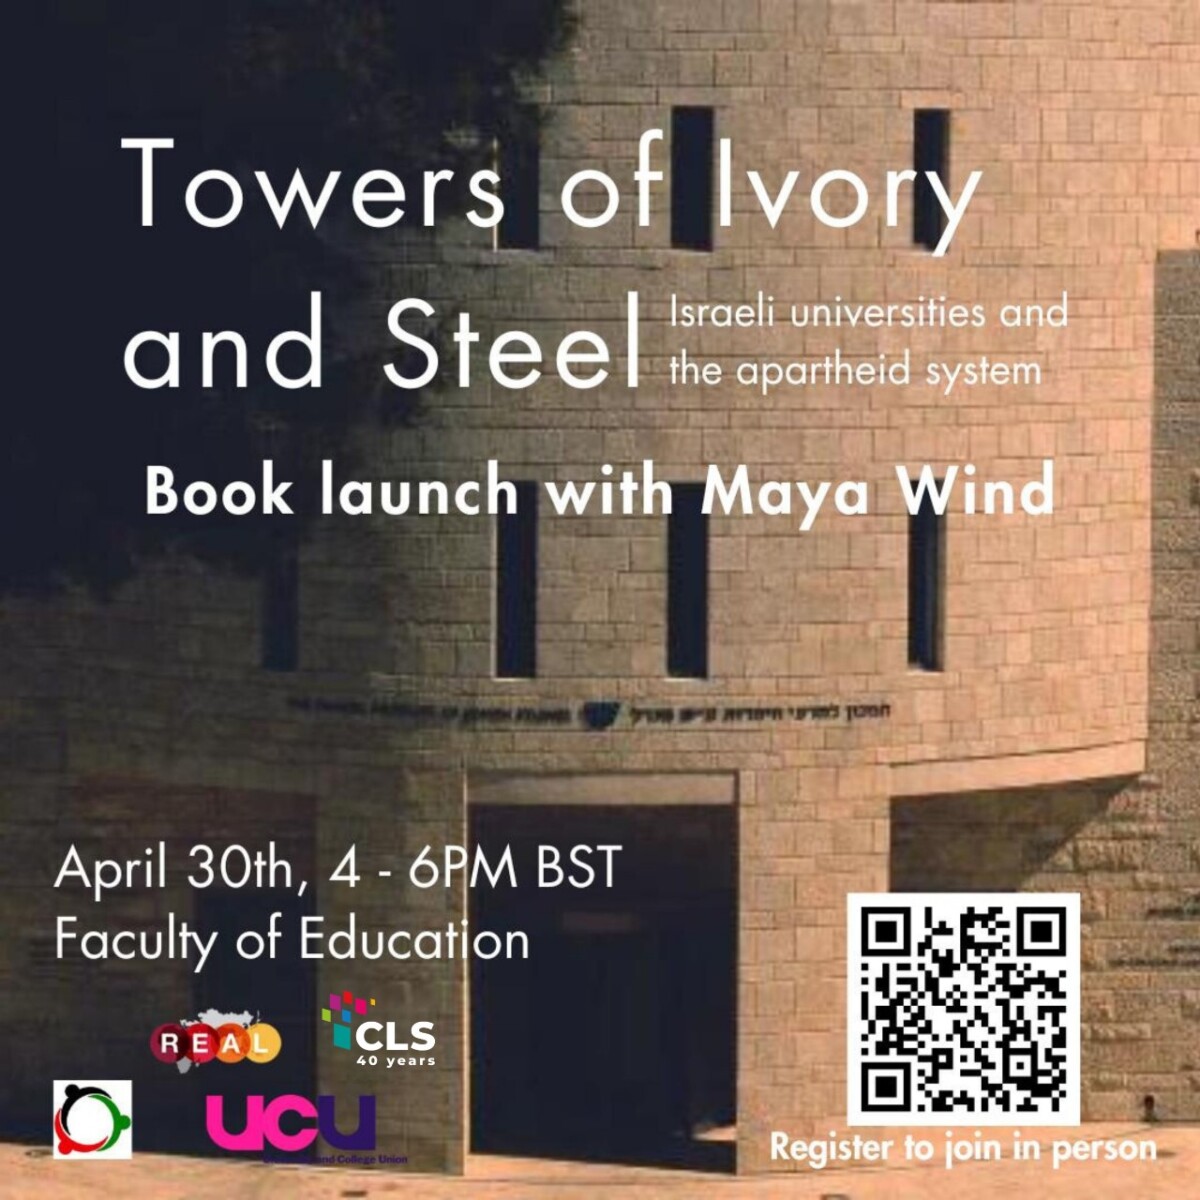 Towers of Ivory and Steel: Israeli Universities and the Apartheid System